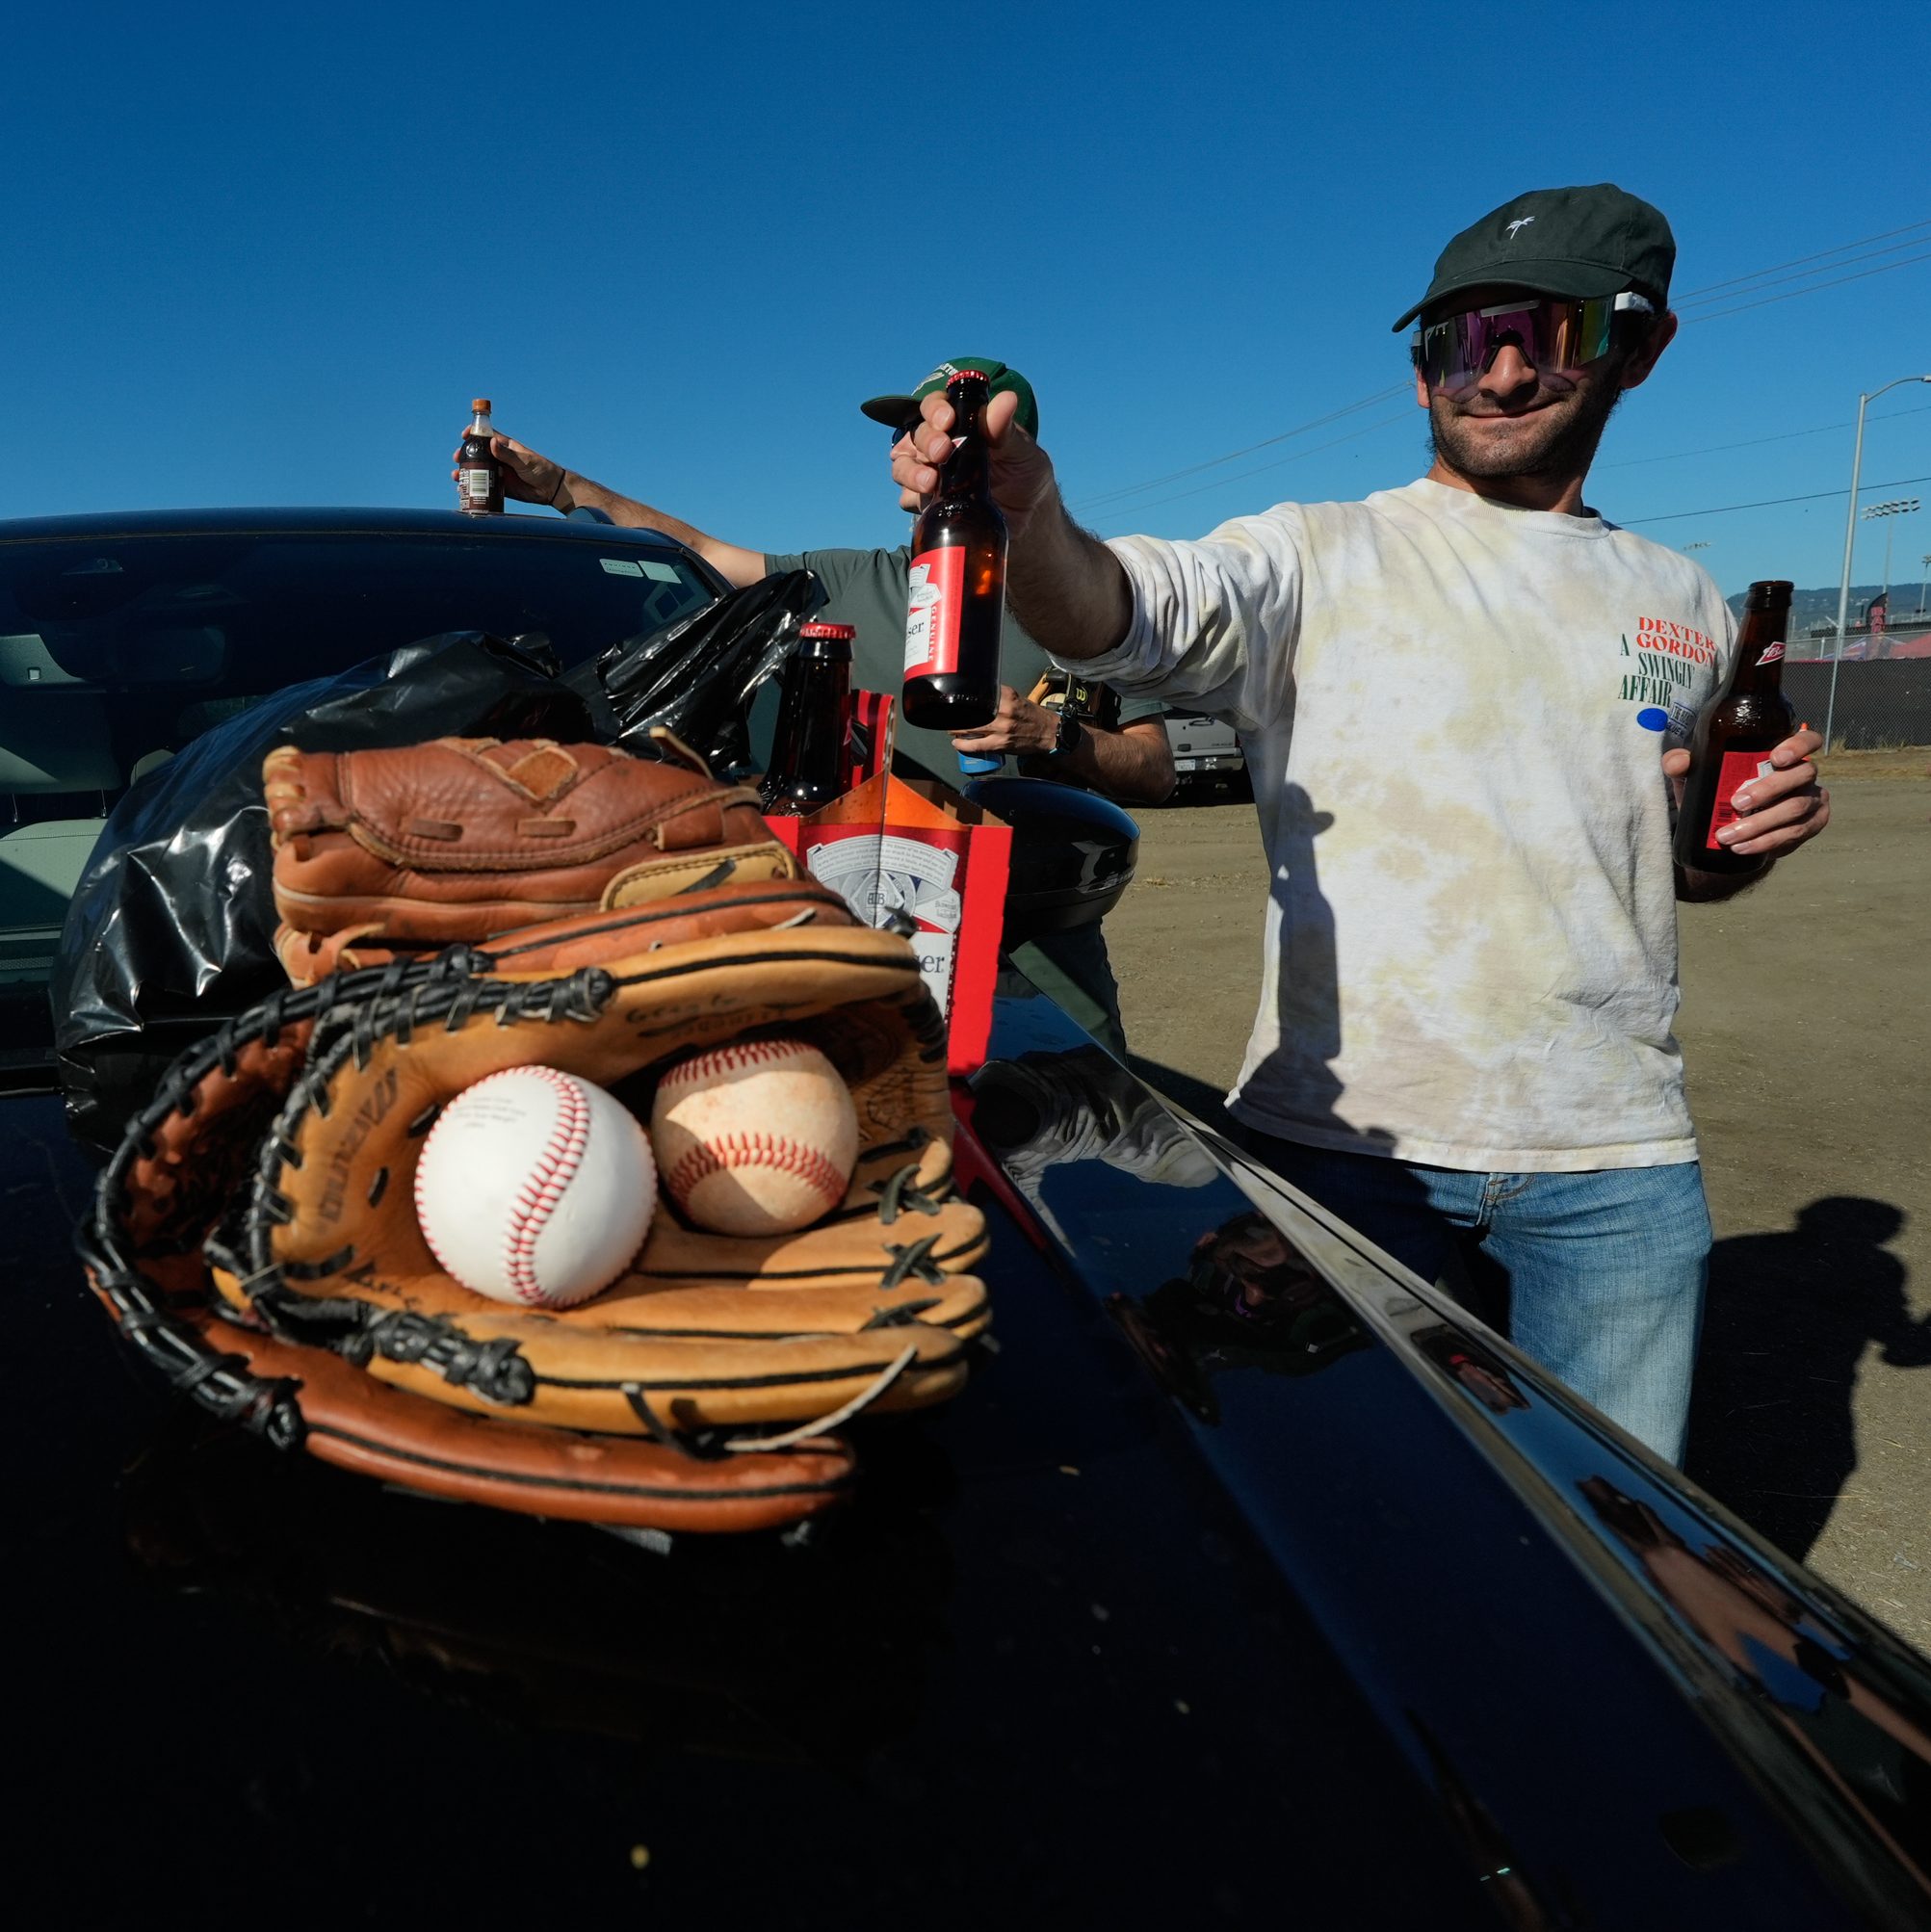 A person in casual clothes holds a beer bottle, standing by a car with baseball gloves, balls, and more bottles on the car's hood, under a clear blue sky.